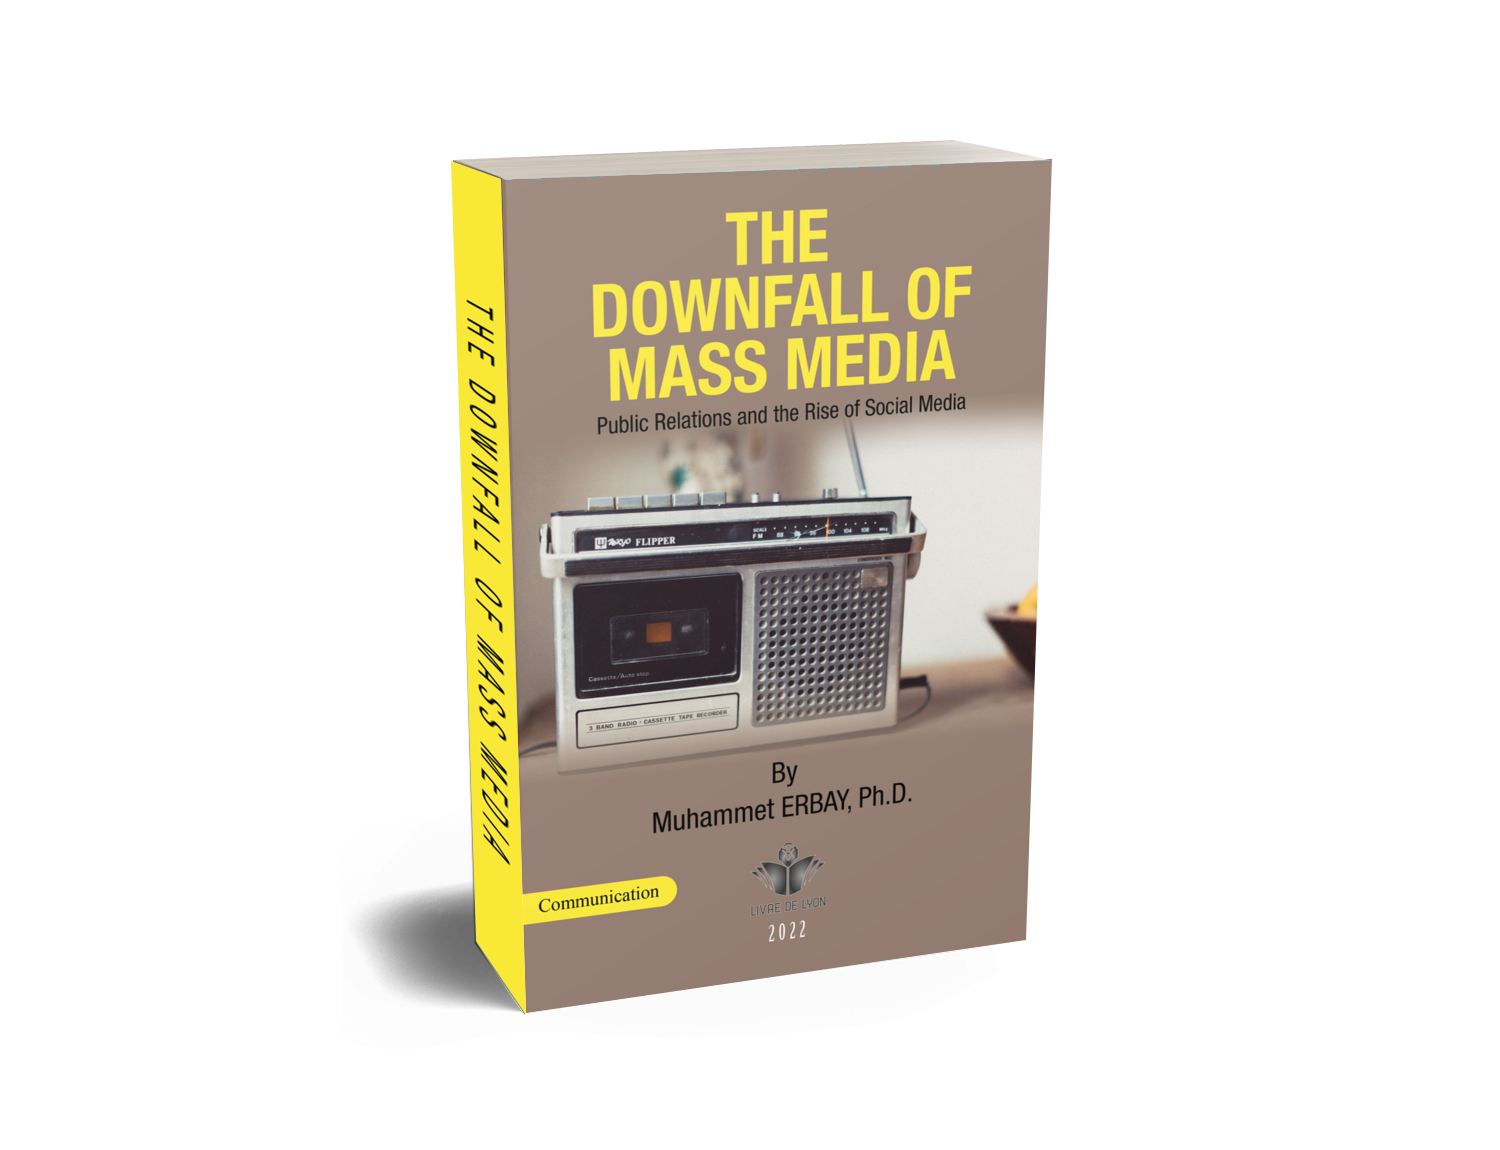 The Downfall of Mass Media: Public Relations and the Rise of Social Media